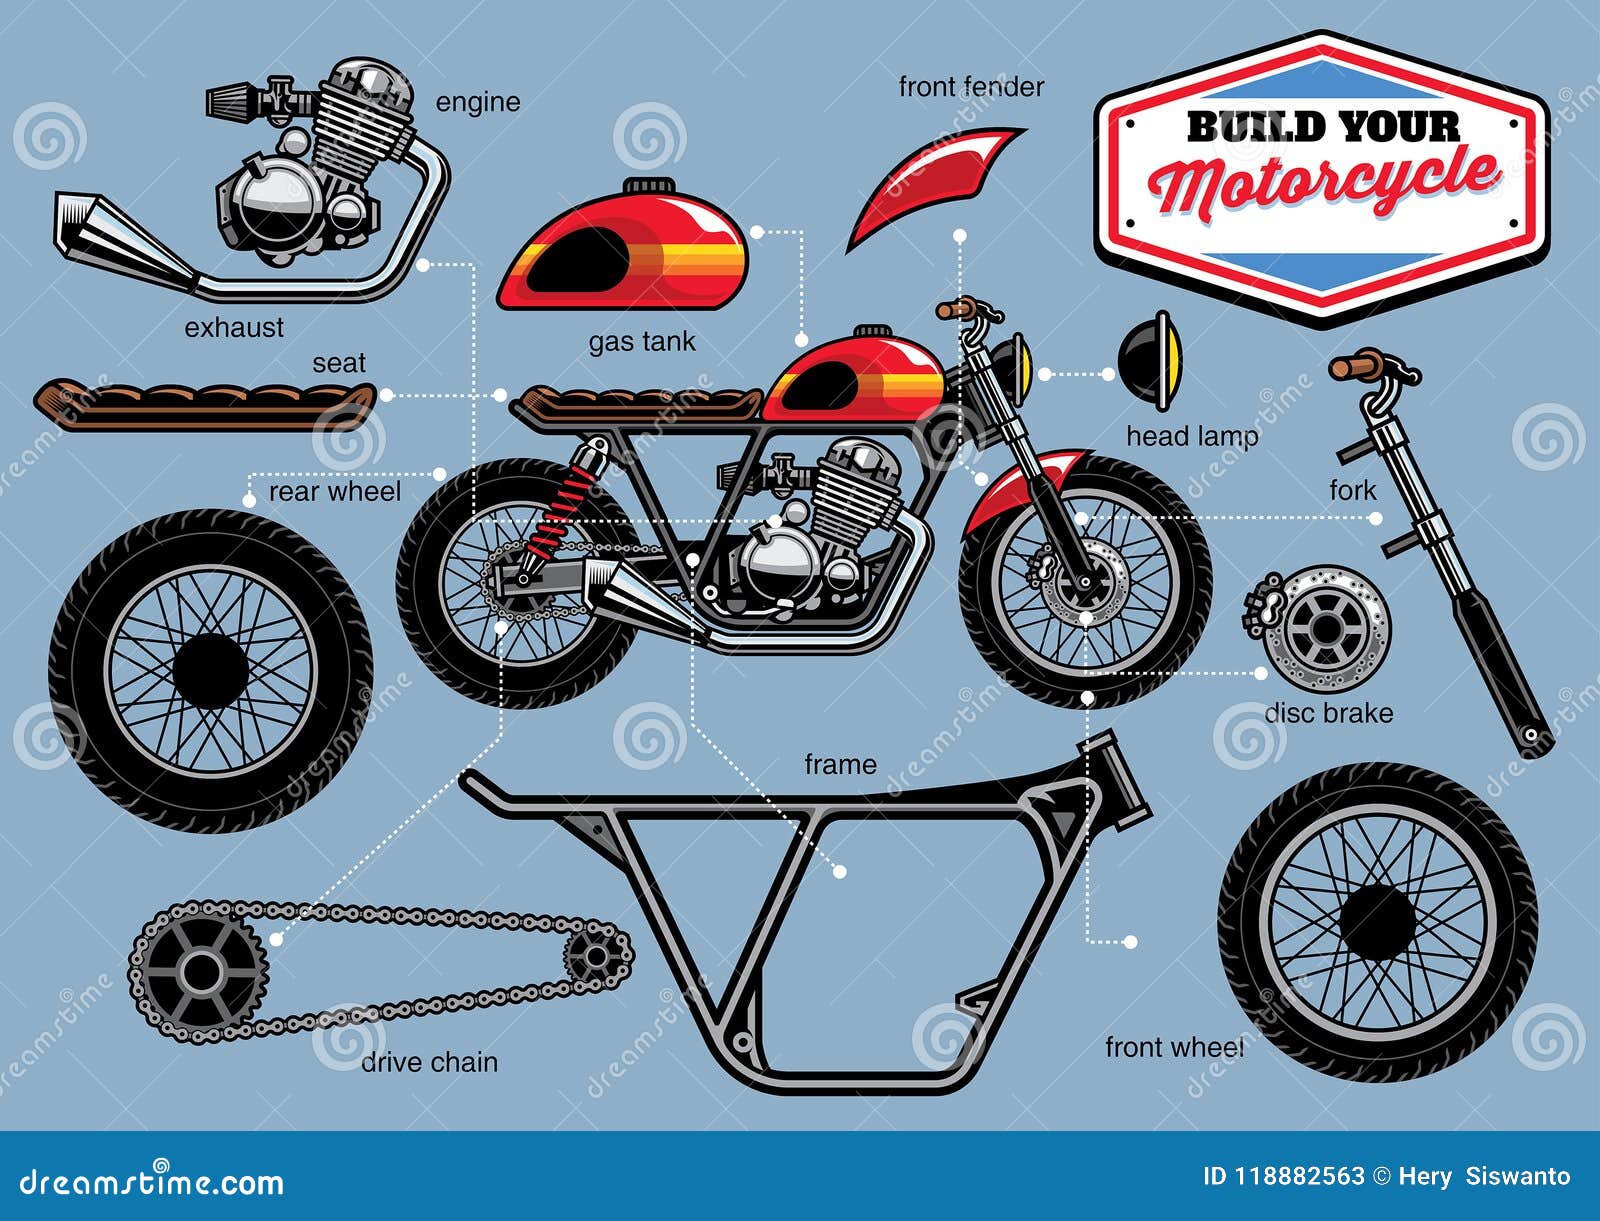 build your cafe racer concept with separated parts